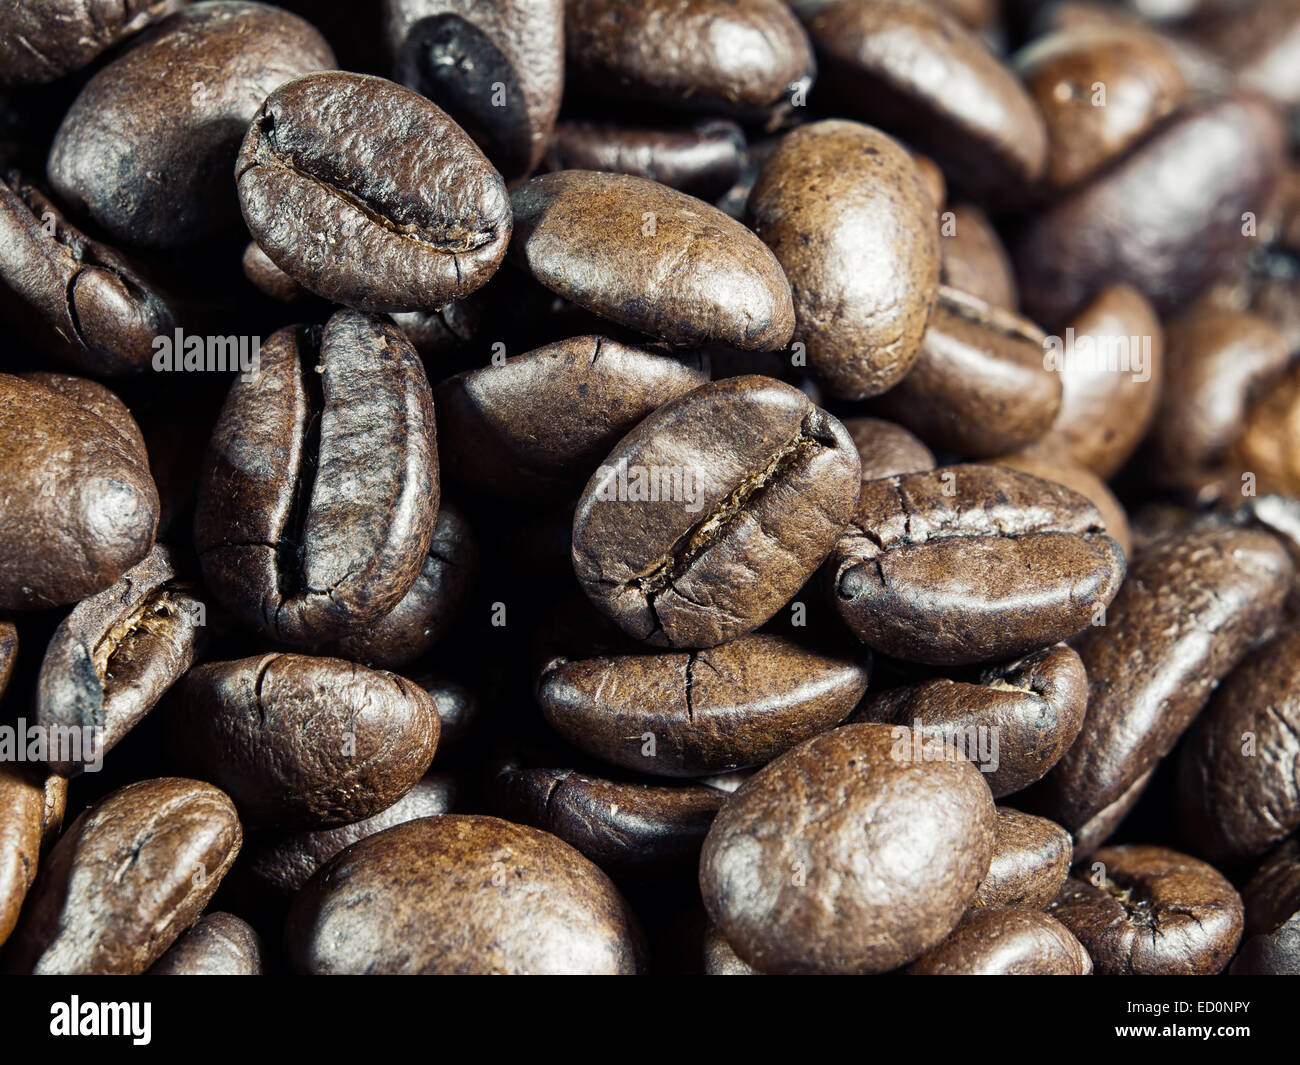 Macro view of roasted whole coffee beans. Stock Photo